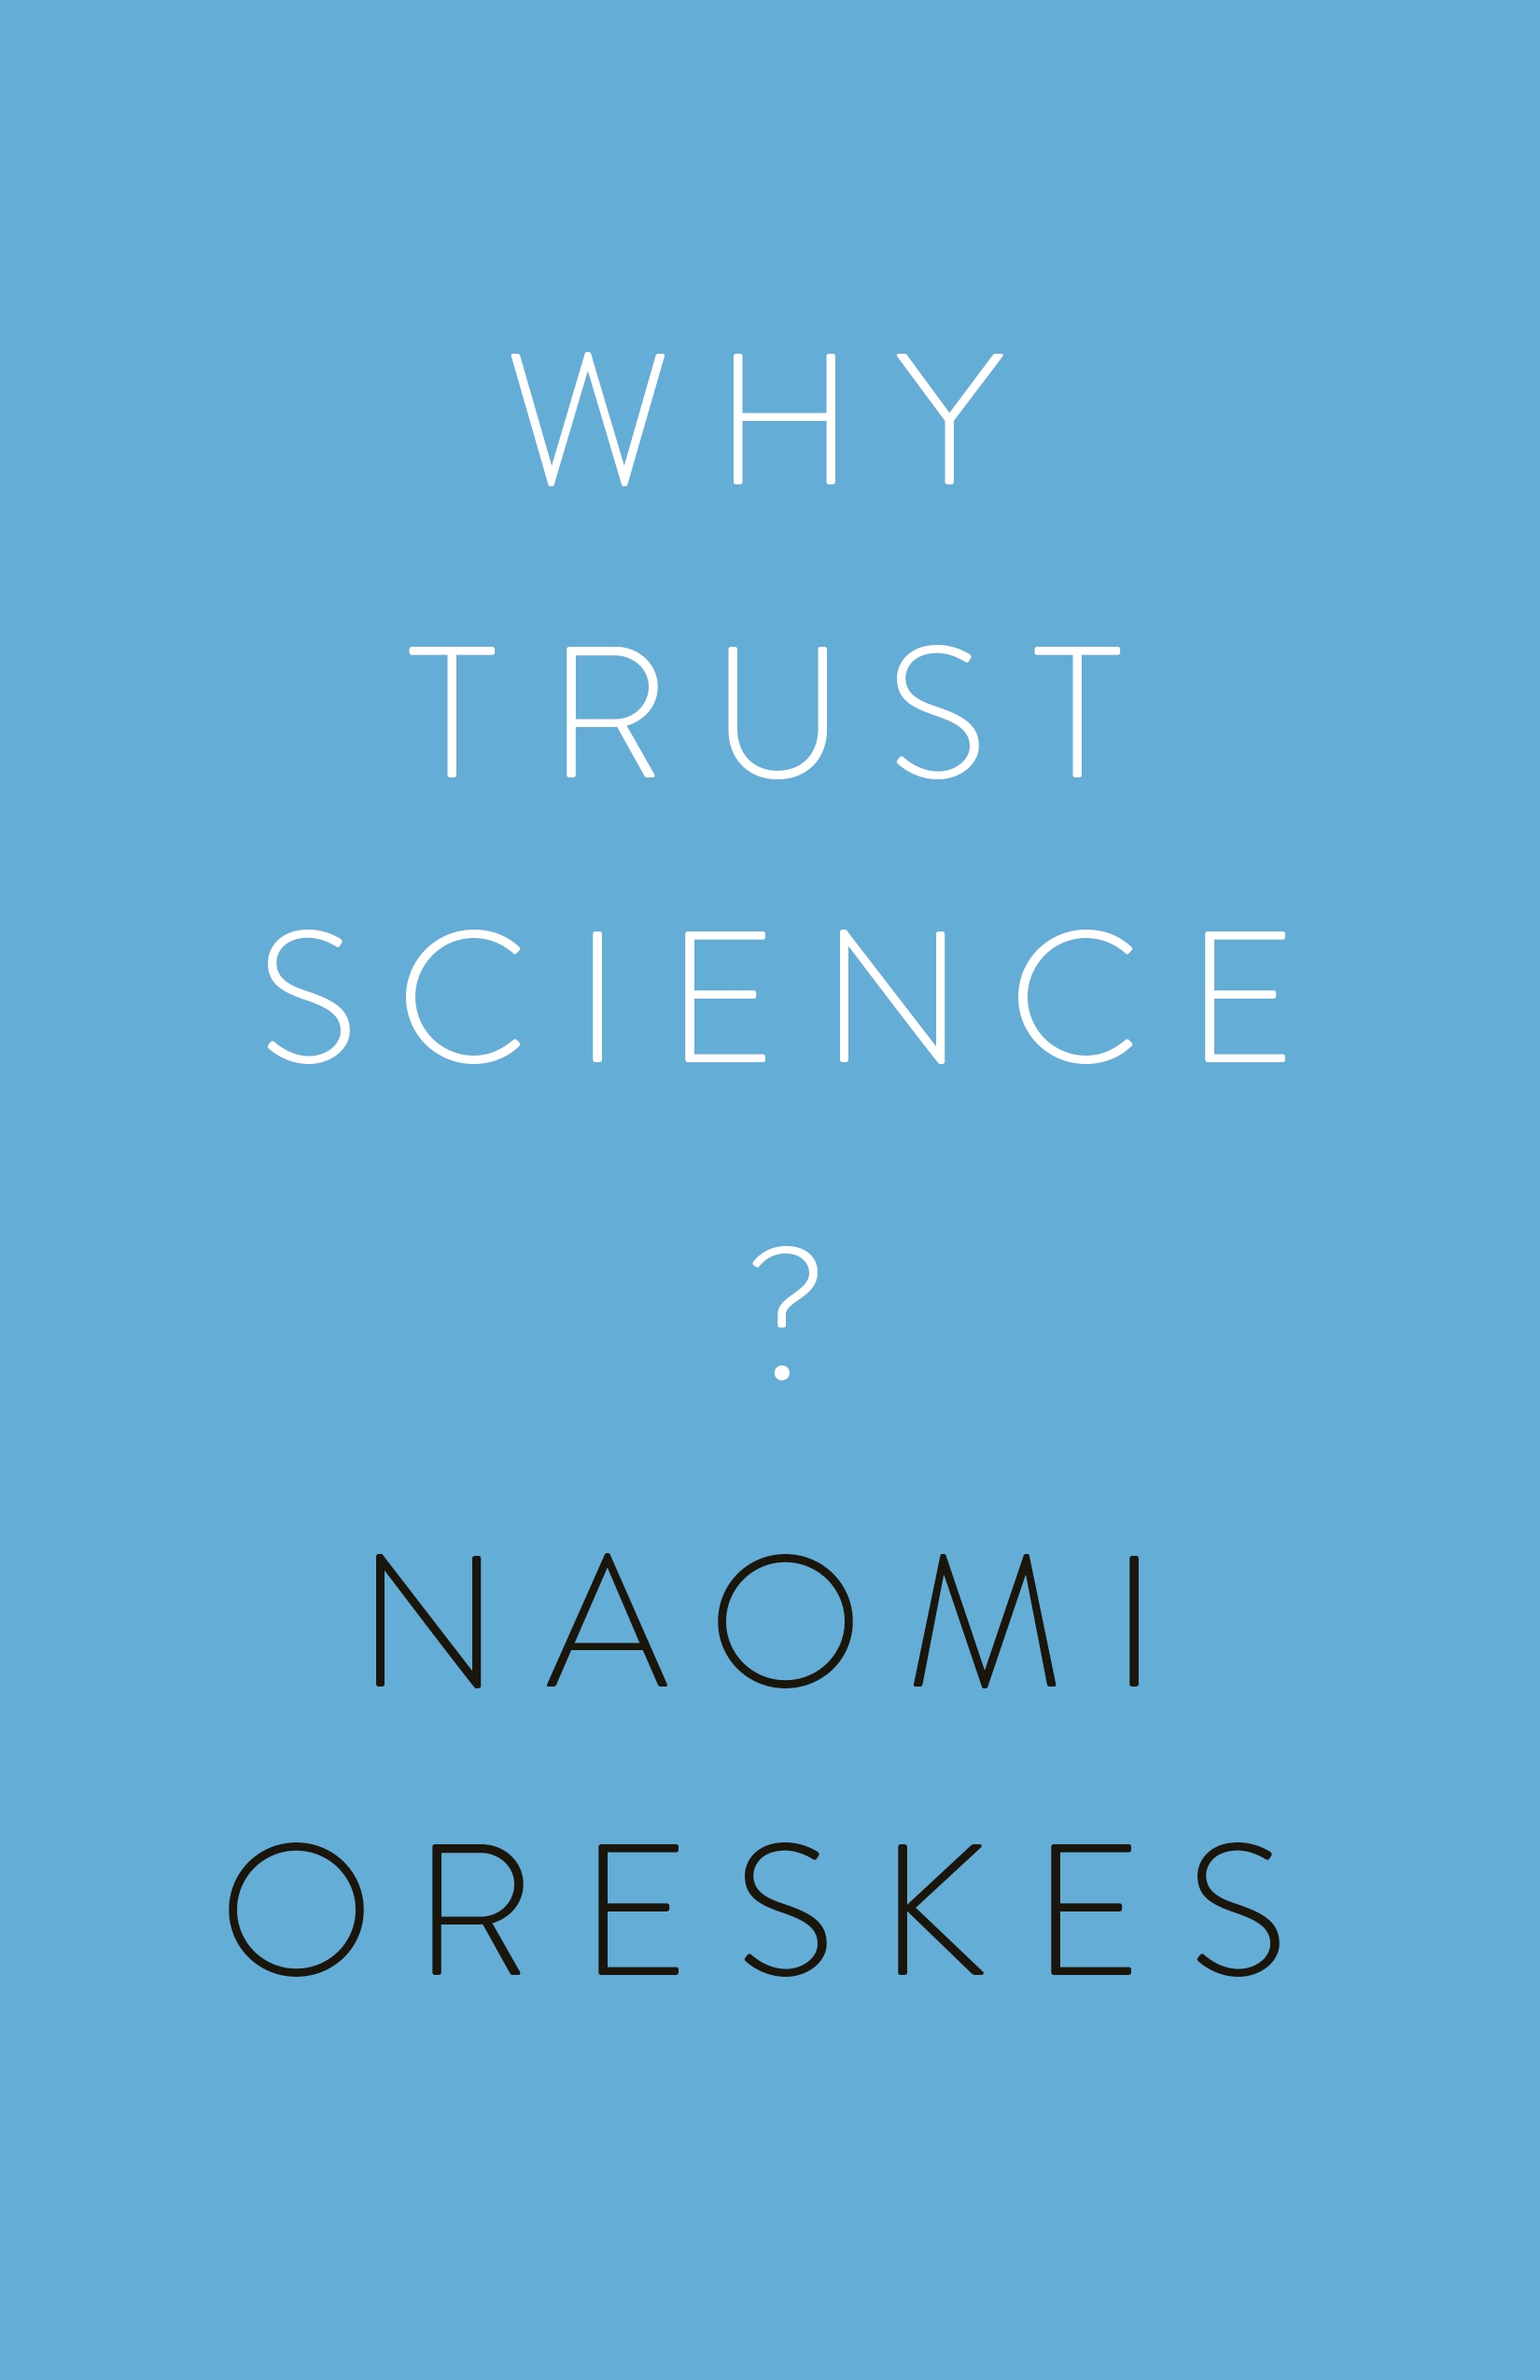 A Blue Book named Why Trust Science